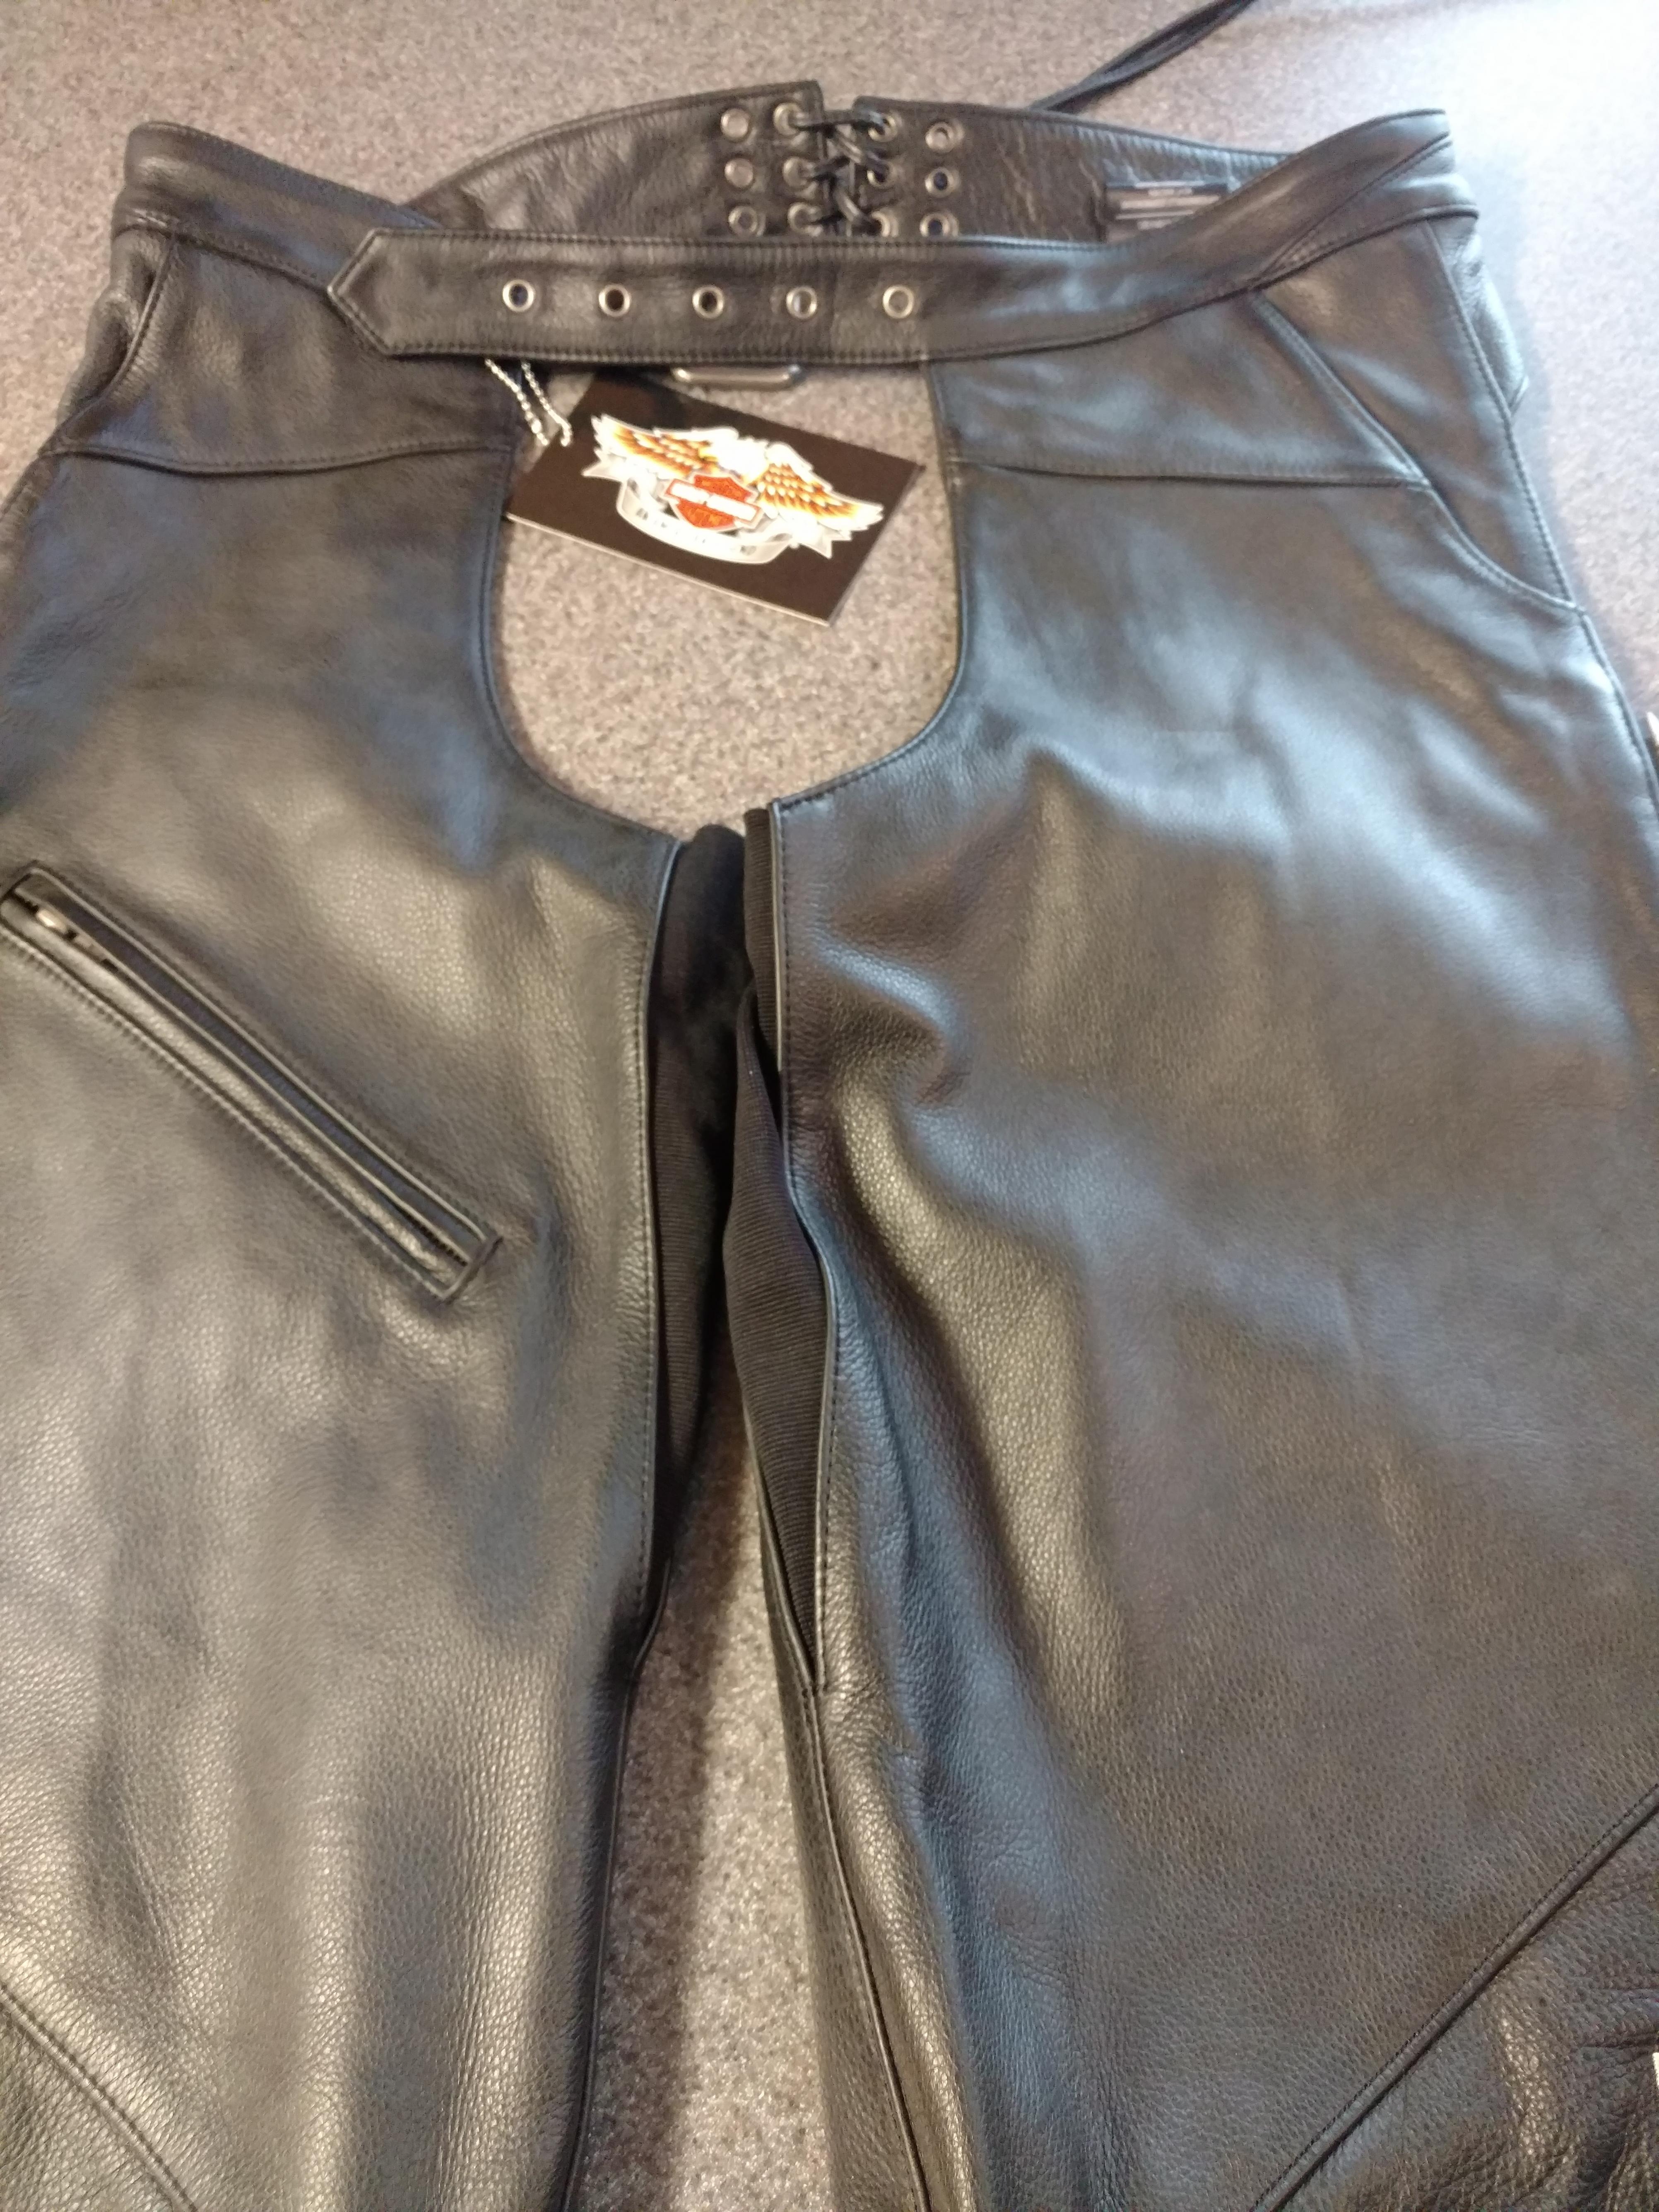 Ladies Harley Deluxe Chaps - Size Large - Harley Davidson Forums